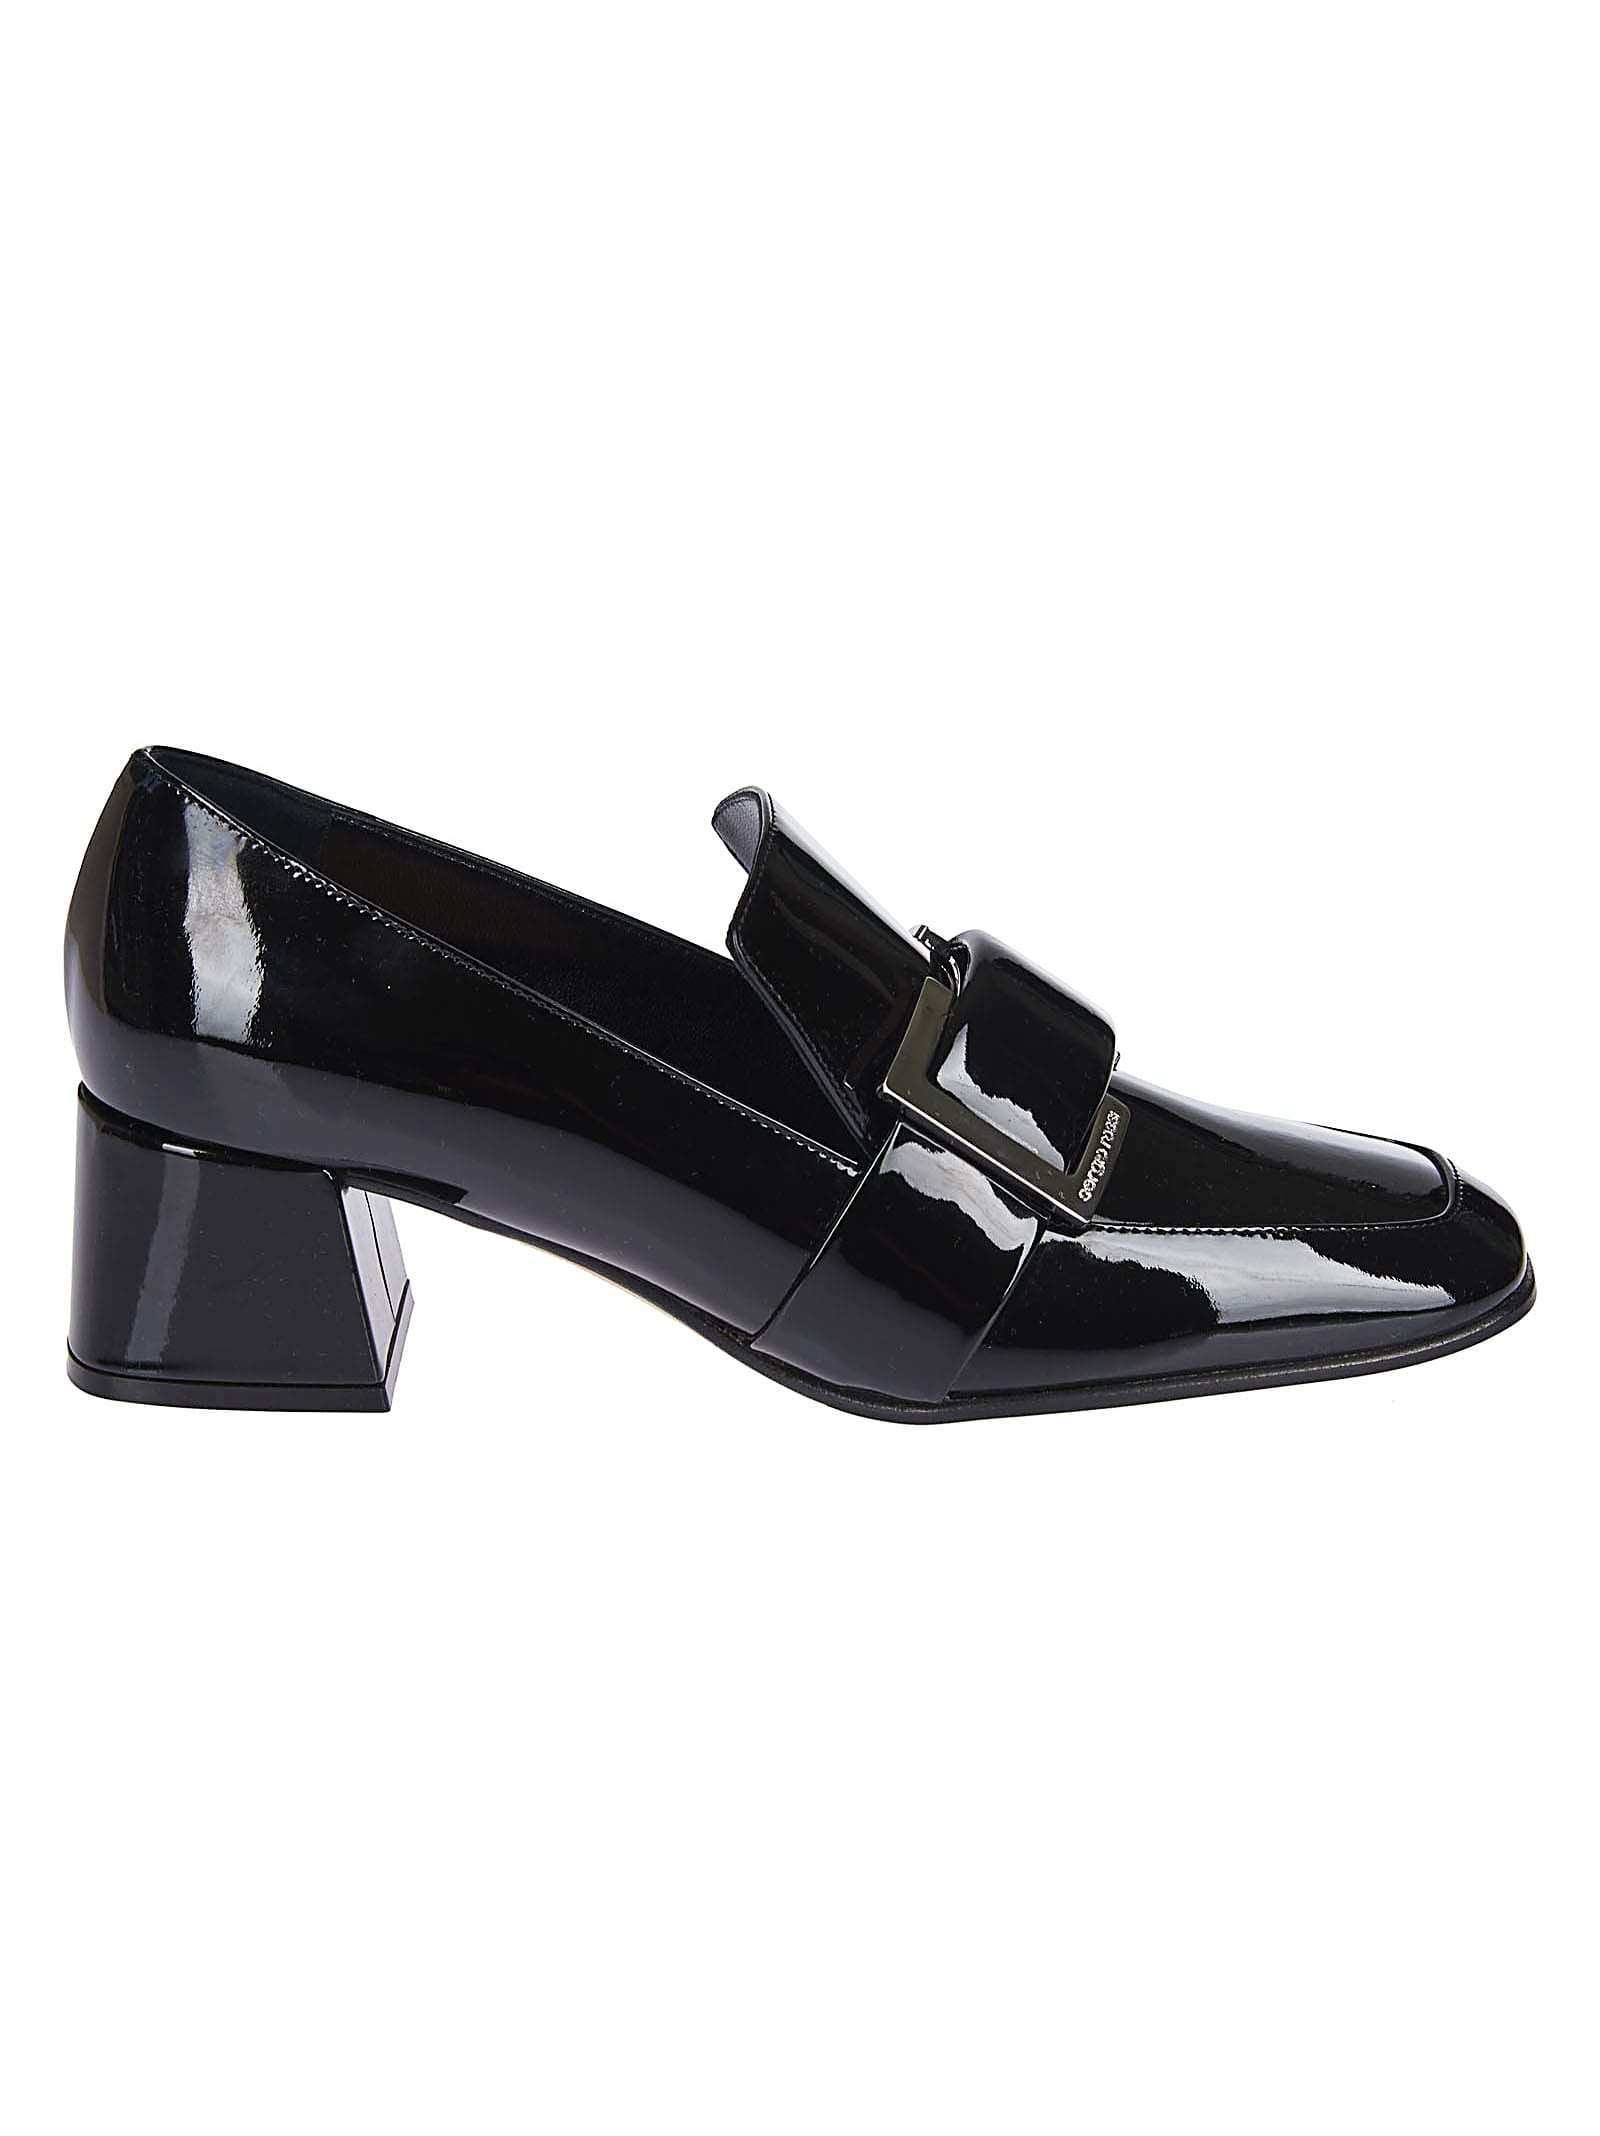 Buy Sergio Rossi Sr Prince Pumps online, shop Sergio Rossi shoes with free shipping